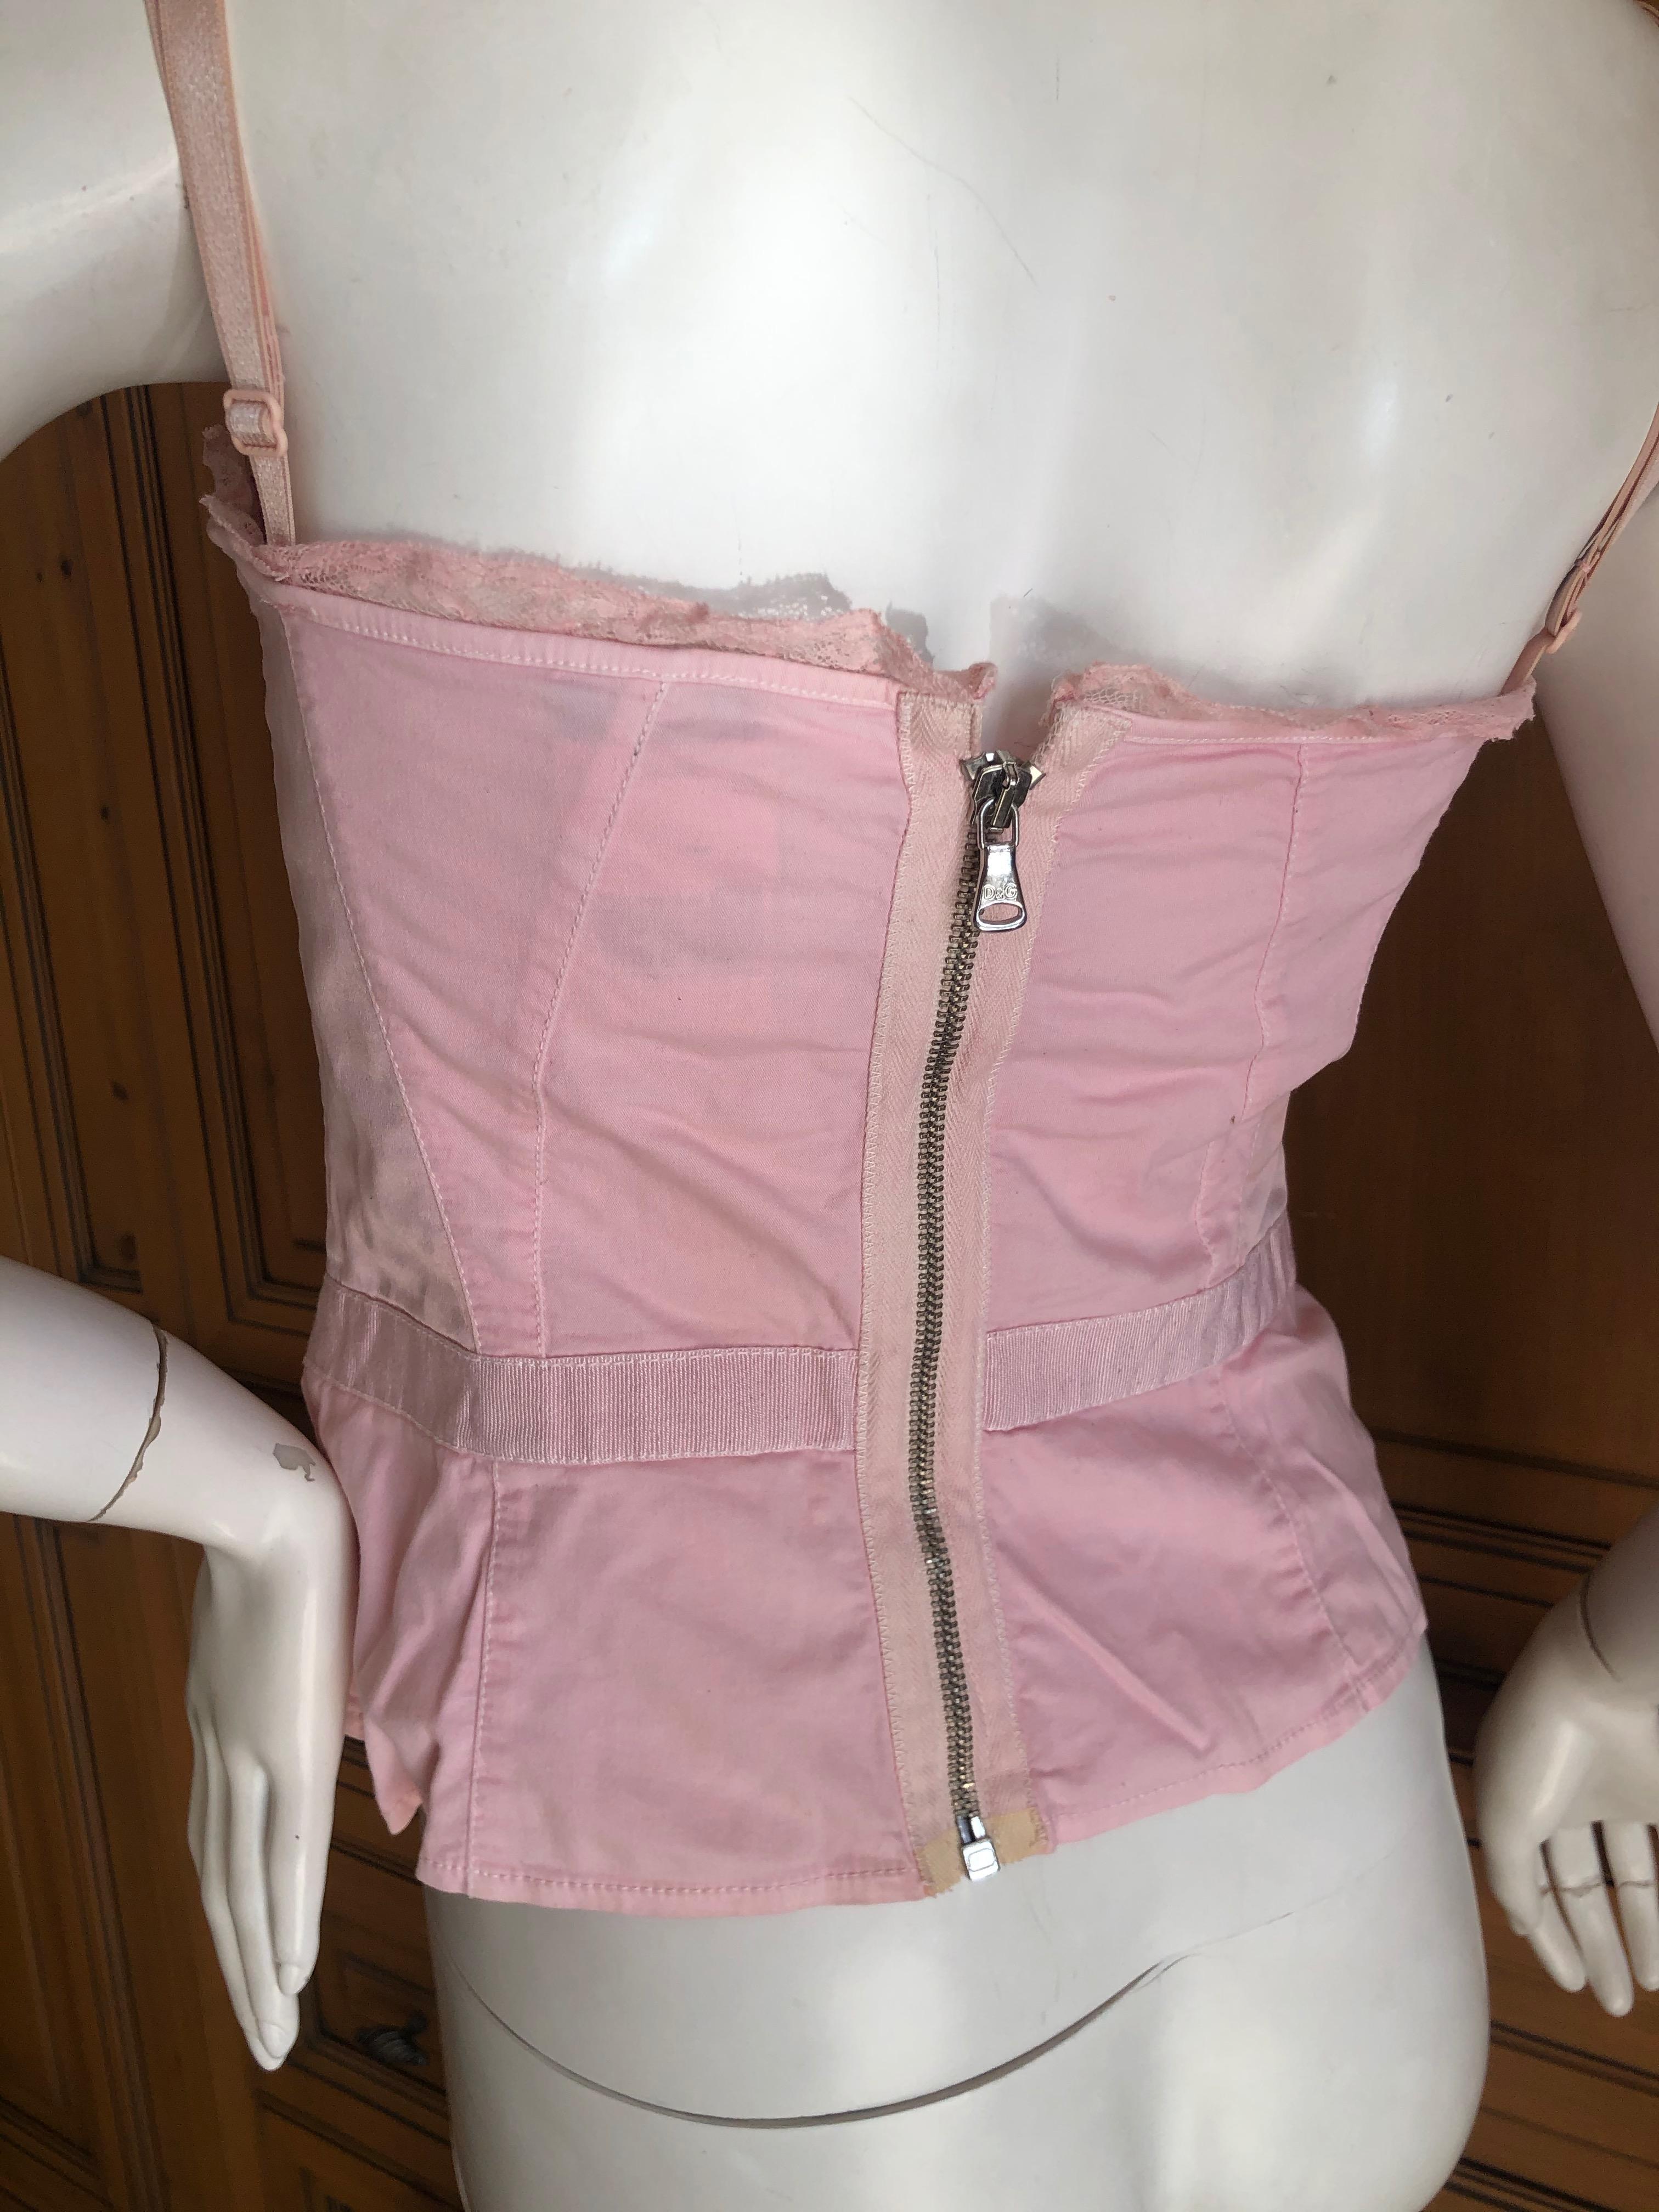 D&G Dolce & Gabbana Vintage Pink Corset with Large Buttons In Excellent Condition For Sale In Cloverdale, CA